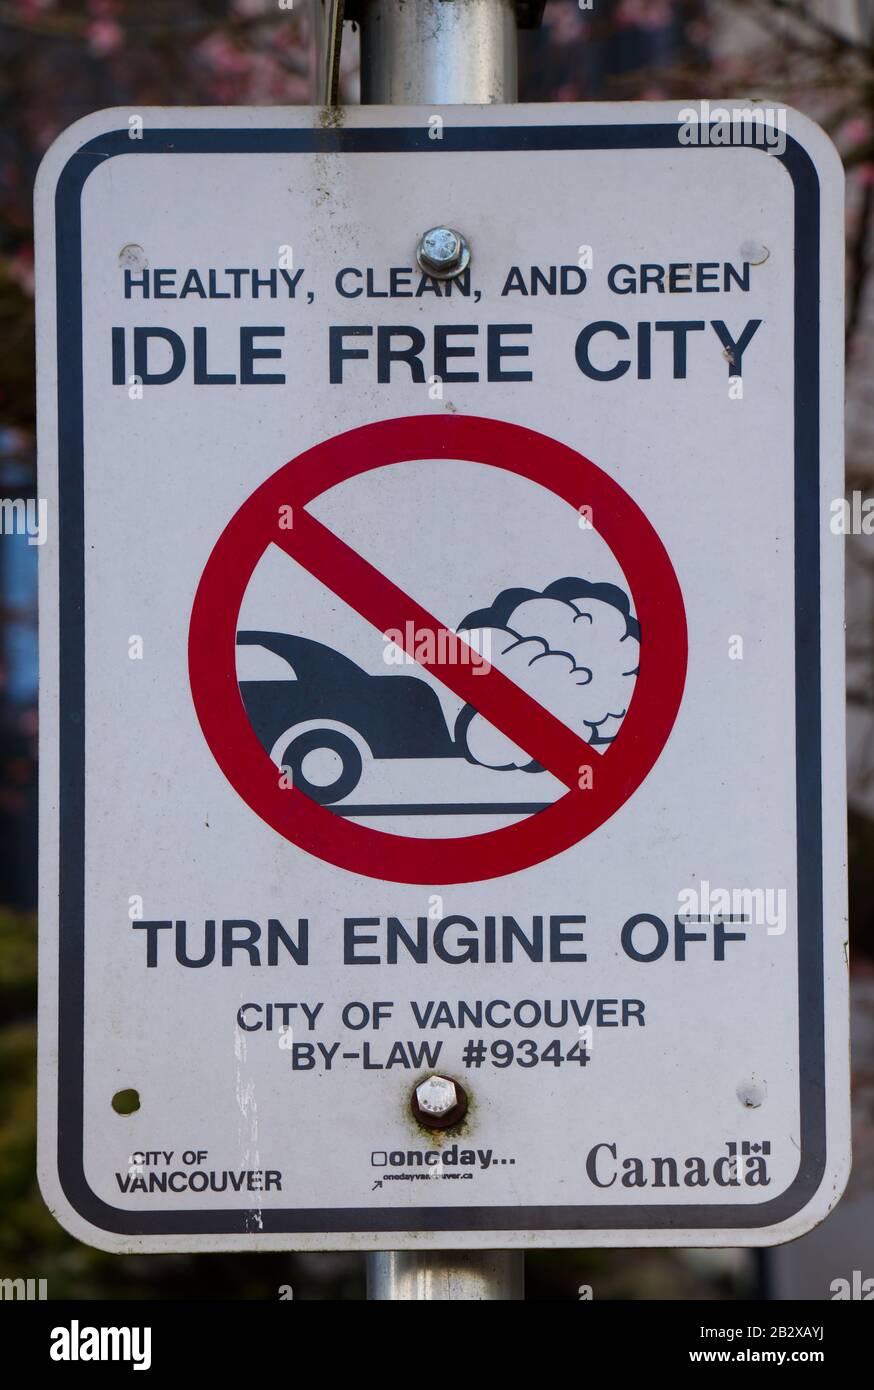 Vancouver, Canada - February 17, 2020: View of road sign "Idle Free City" near Vancouver City Hall Building Stock Photo